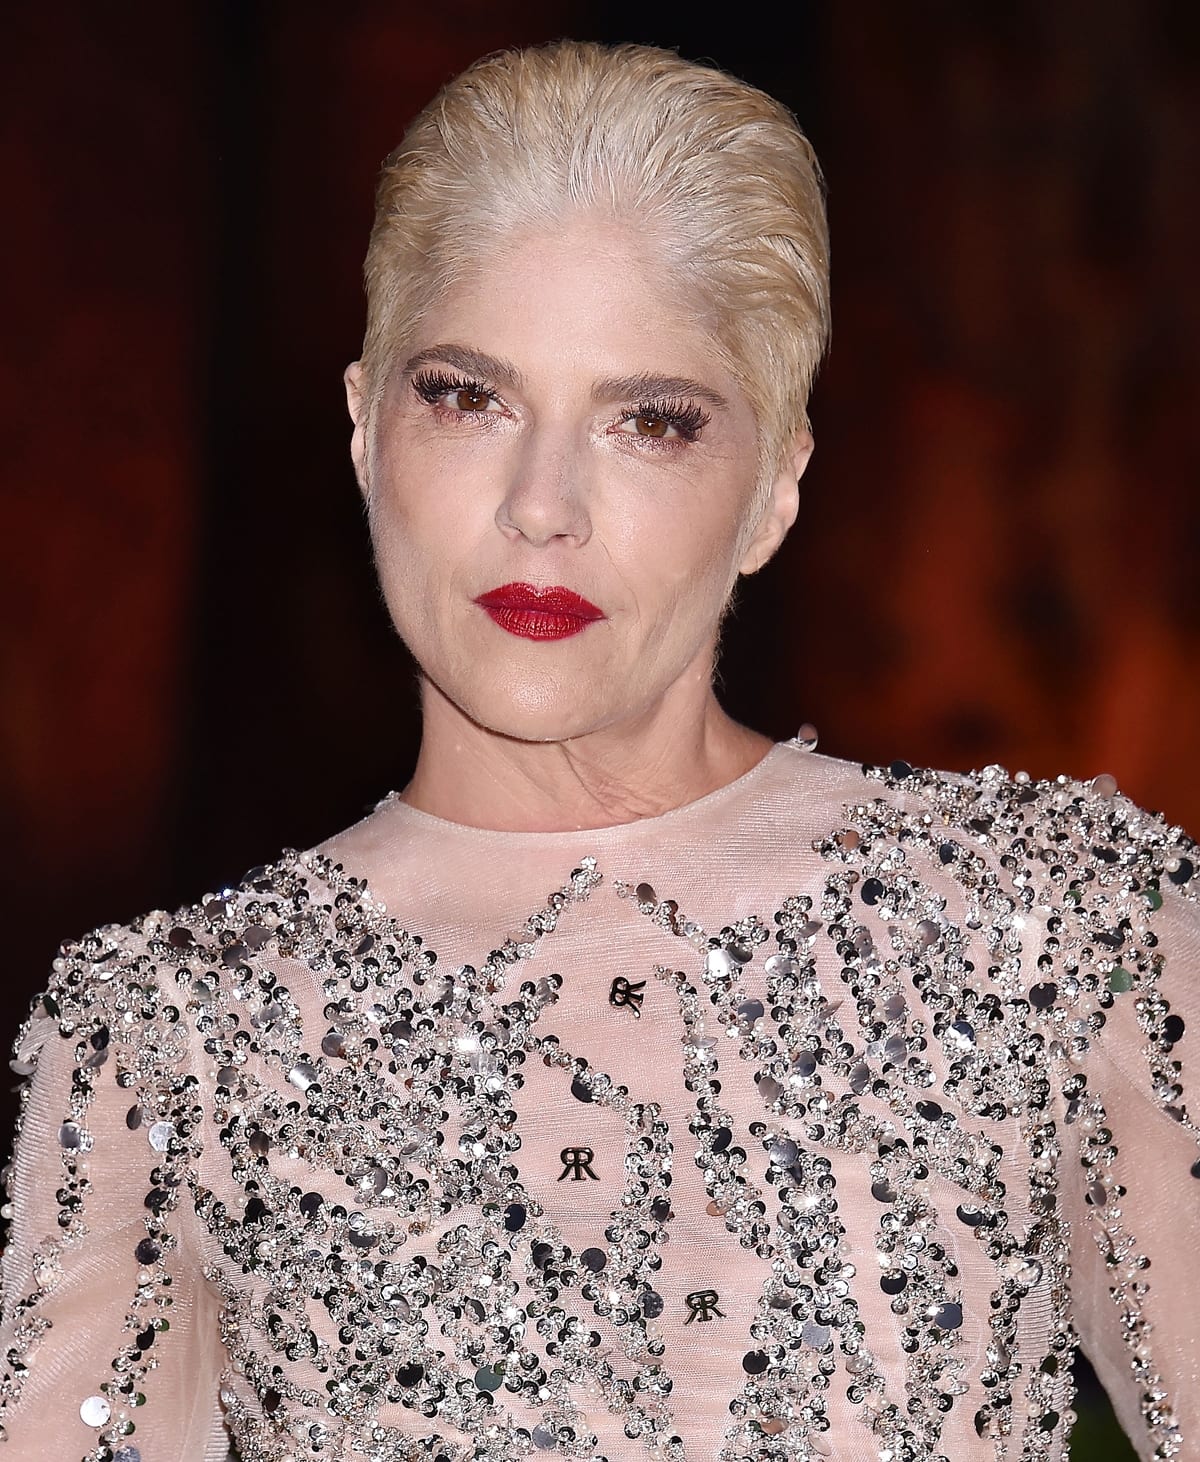 Selma Blair is best known for her work on Legally Blonde (2001), The Sweetest Thing (2002), Hellboy (2004), and Hellboy II: The Golden Army (2008)